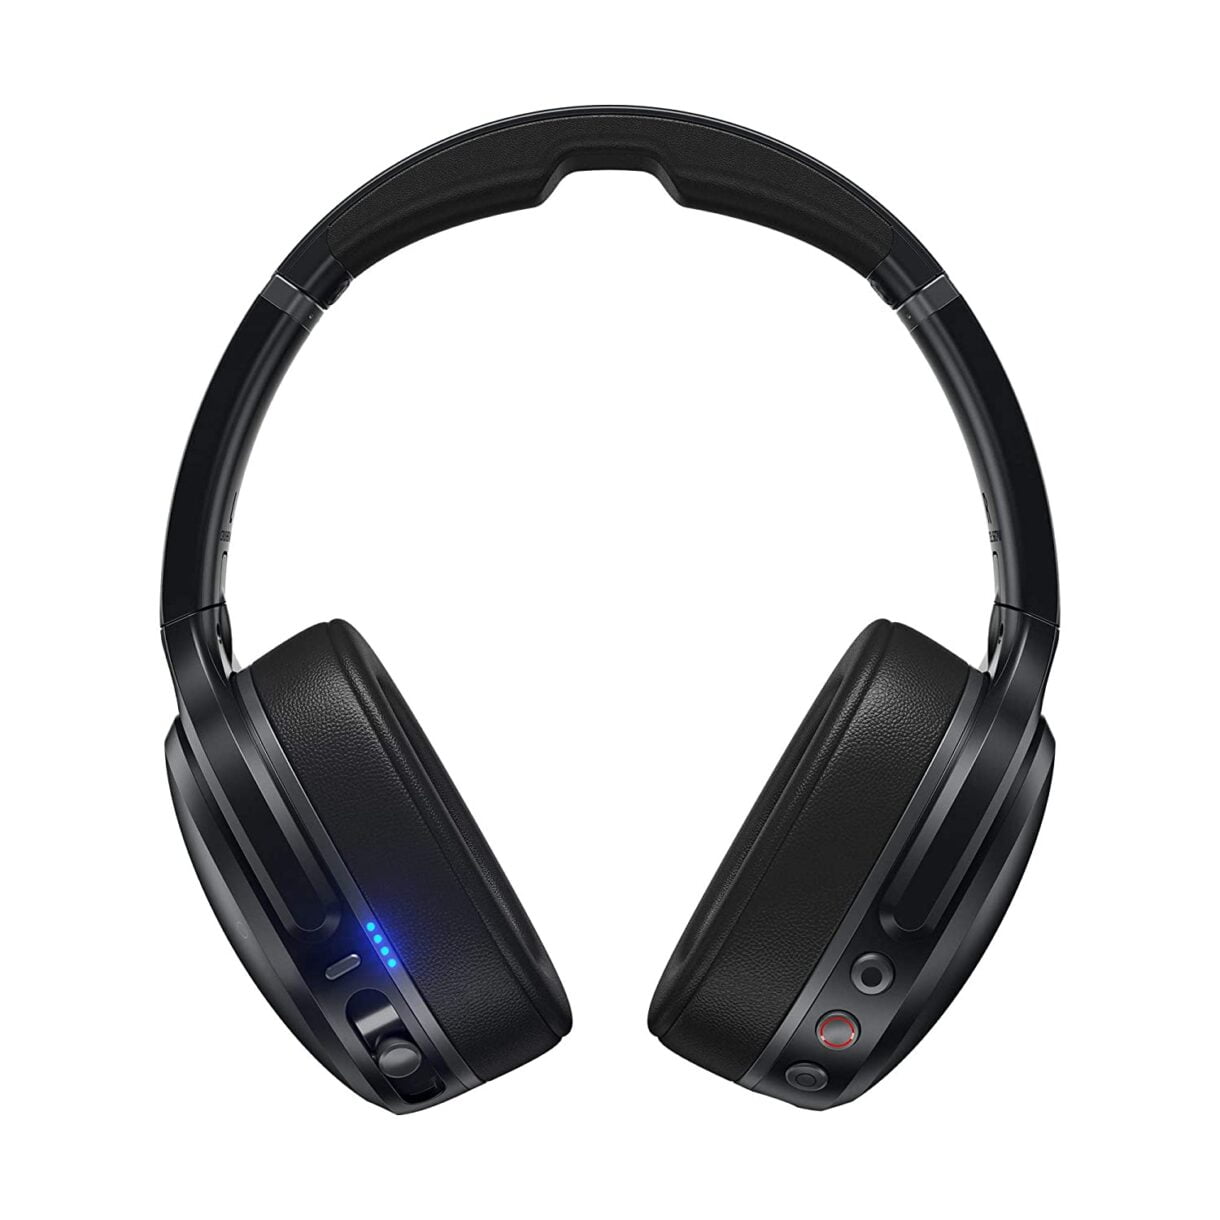 Skullcandy Crusher Active Noise Cancellation Wireless Over-Ear Headphone